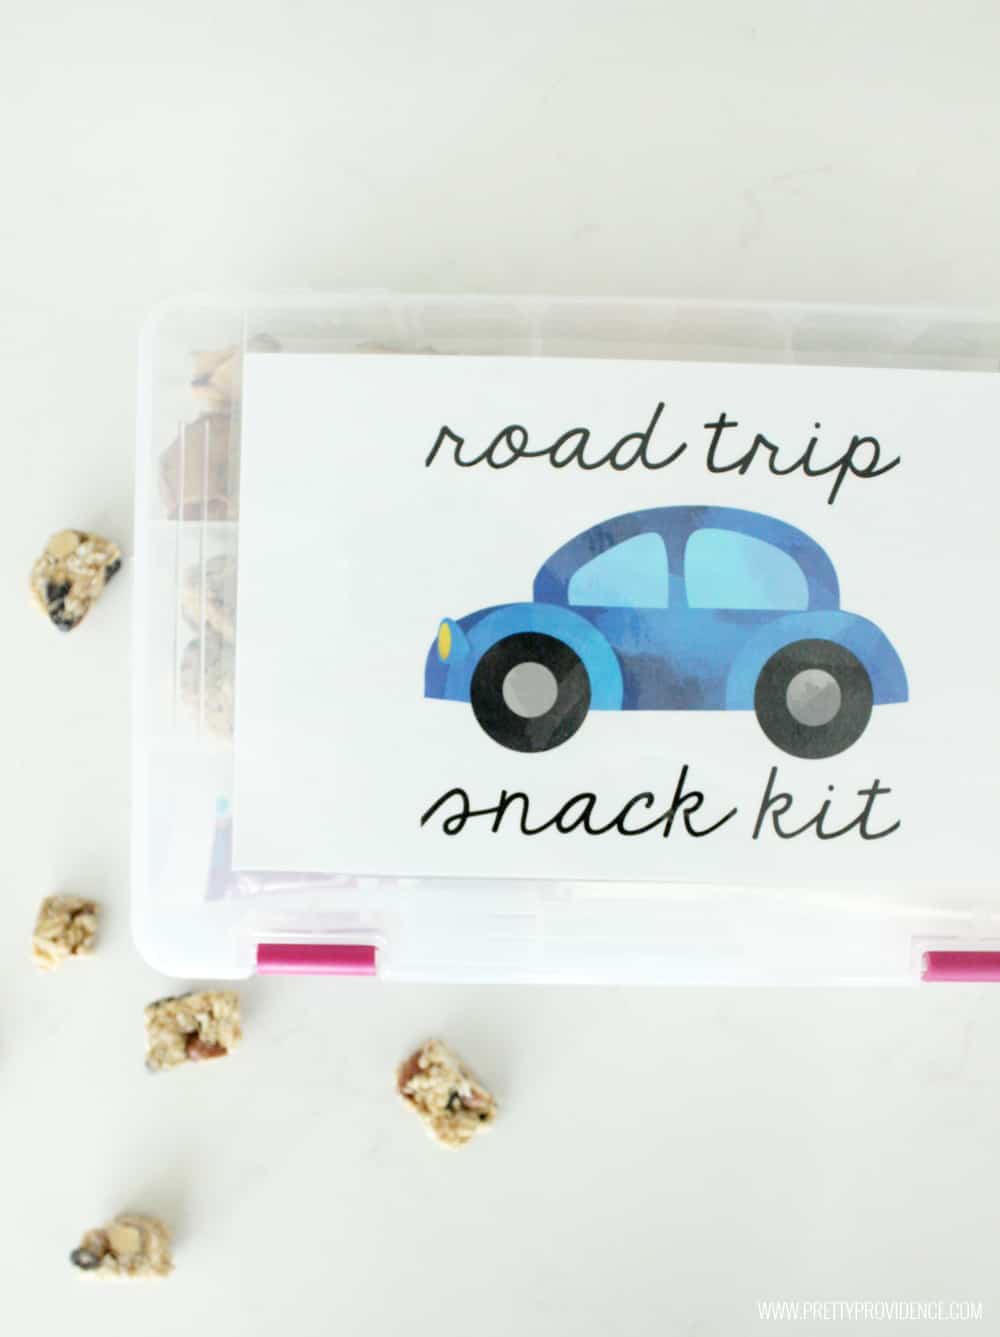 These road trip snack kits are pure GENIUS! Seriously how have I not thought of this before? Perfect for older kids on road trips so moms not constantly turning around! 